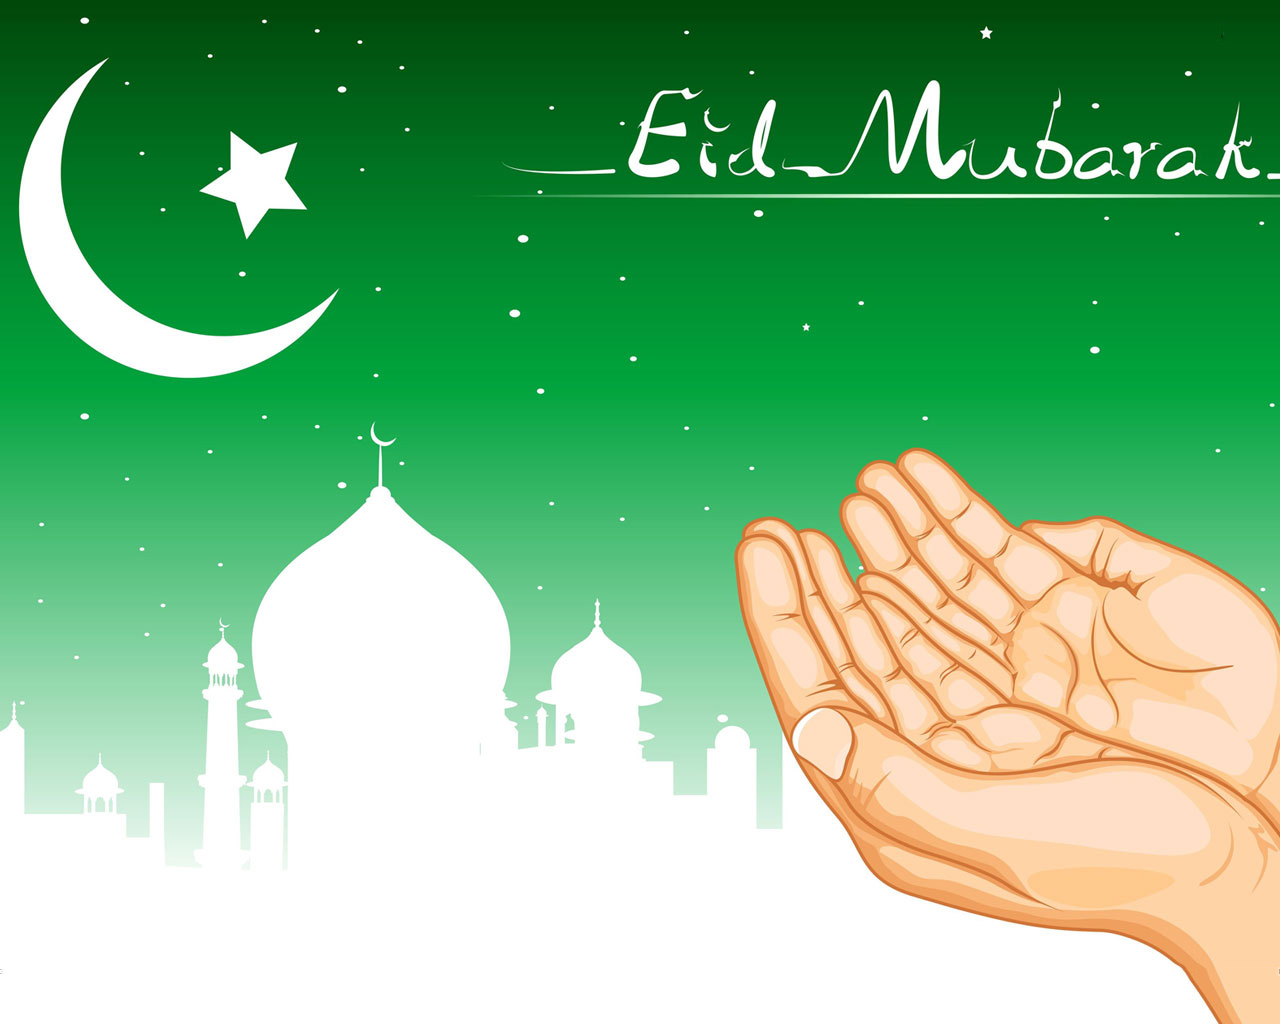 Eid Mubarak HD wallpapers pictures for lovers 